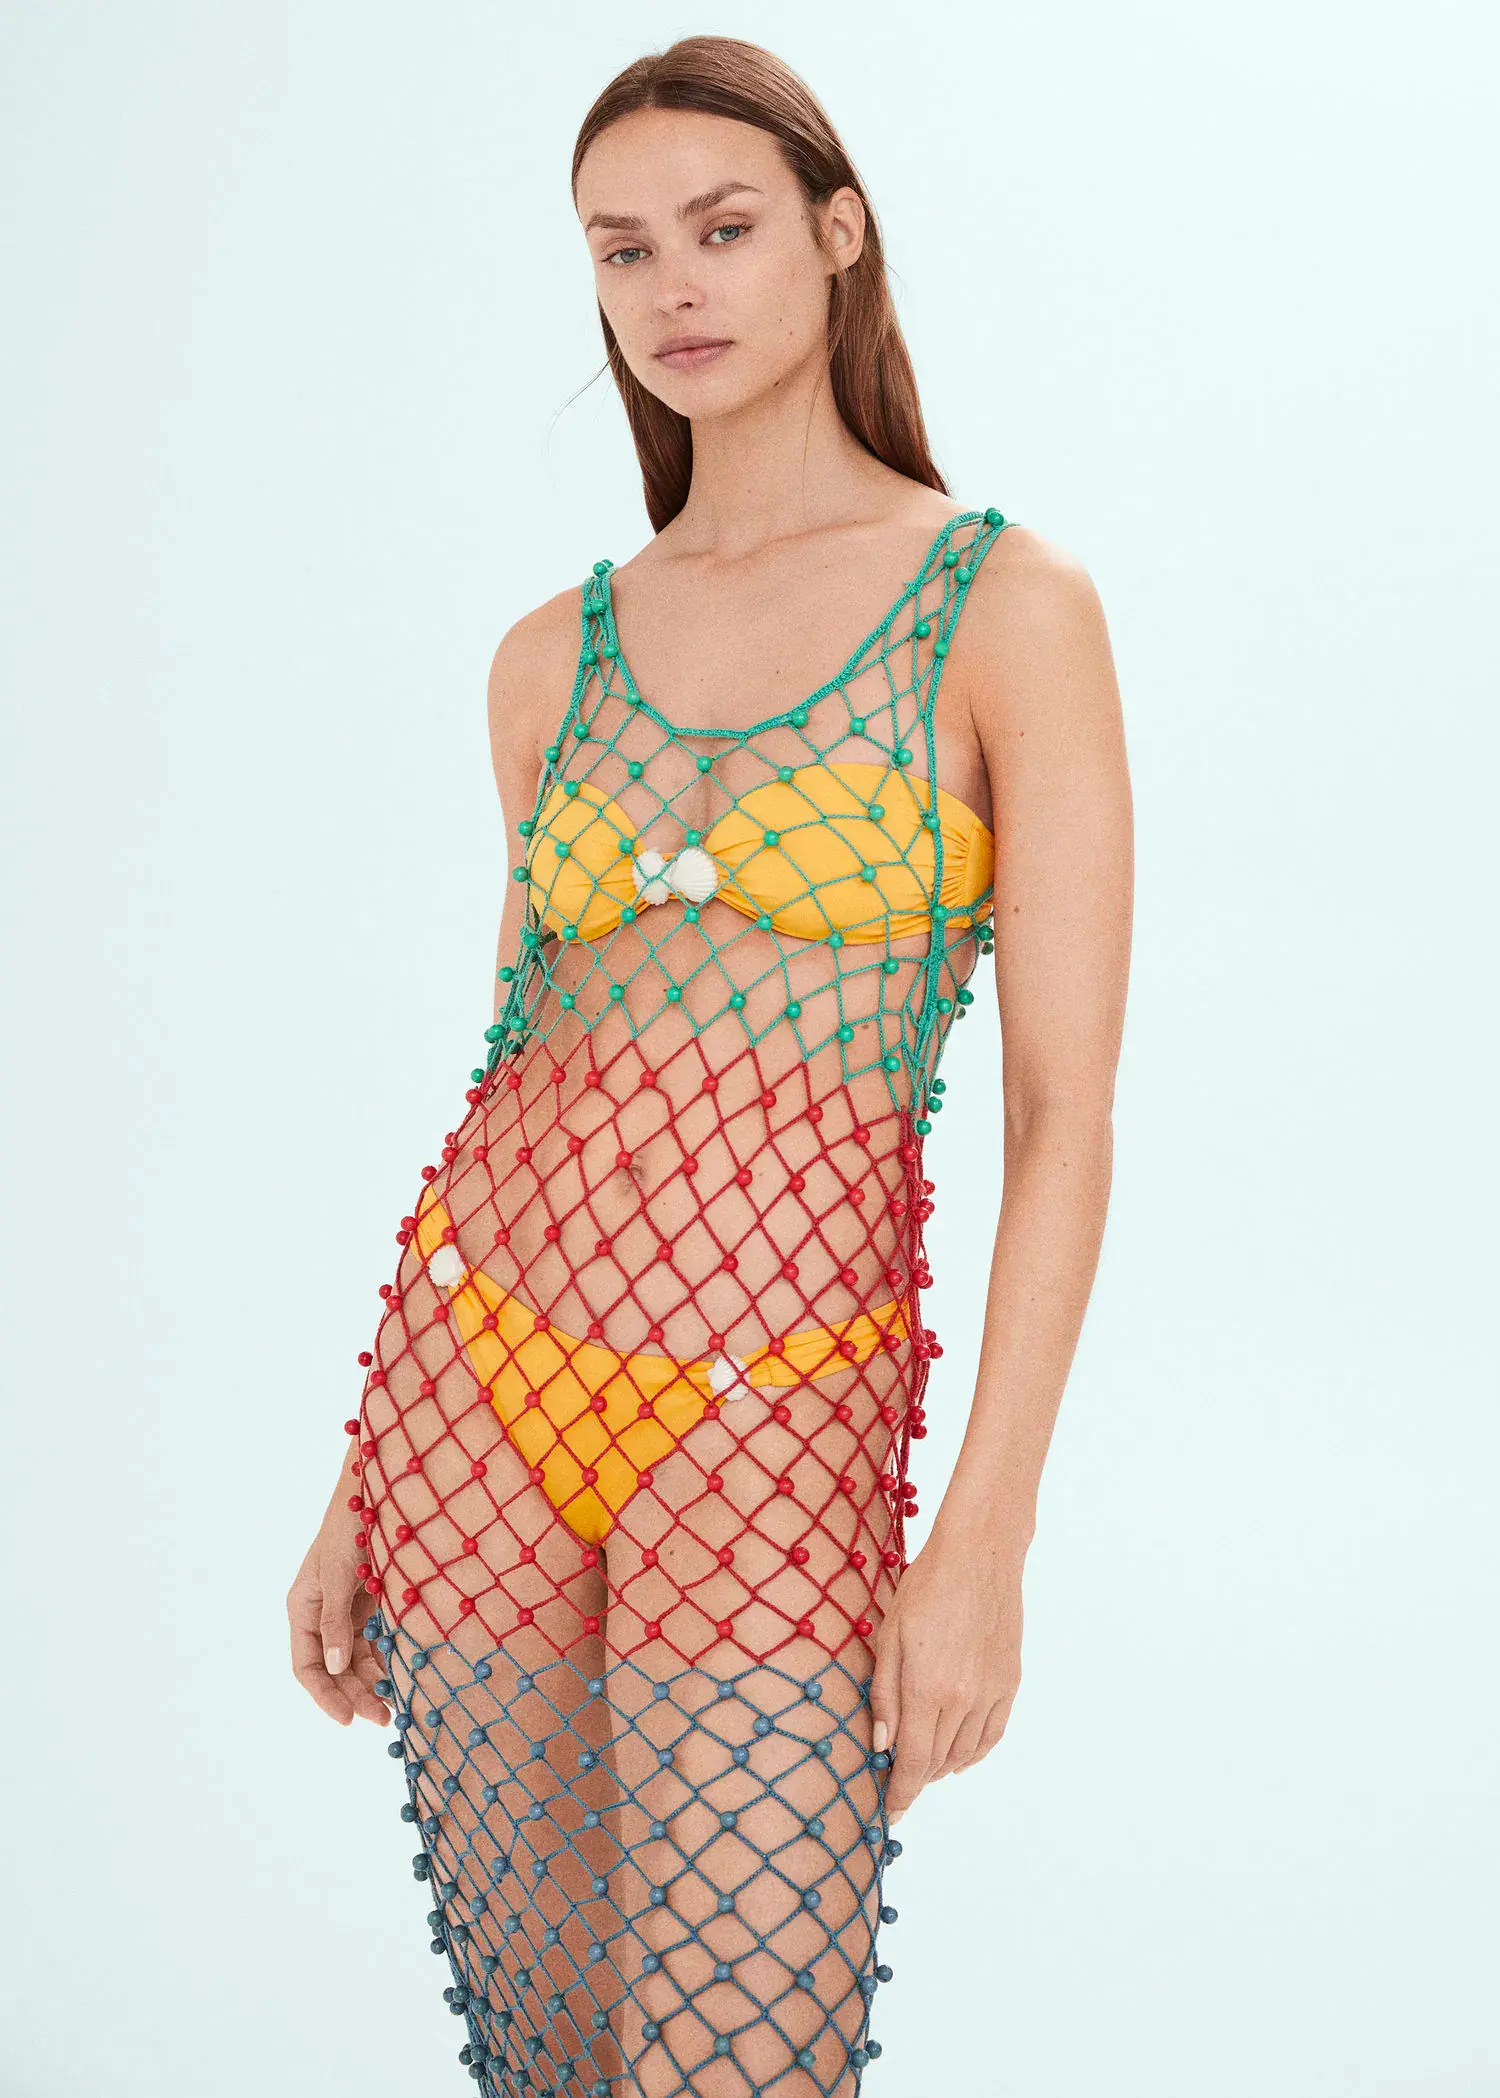 Mango Multi-colored net dress with beads. a woman in a colorful bathing suit standing in front of a wall. 